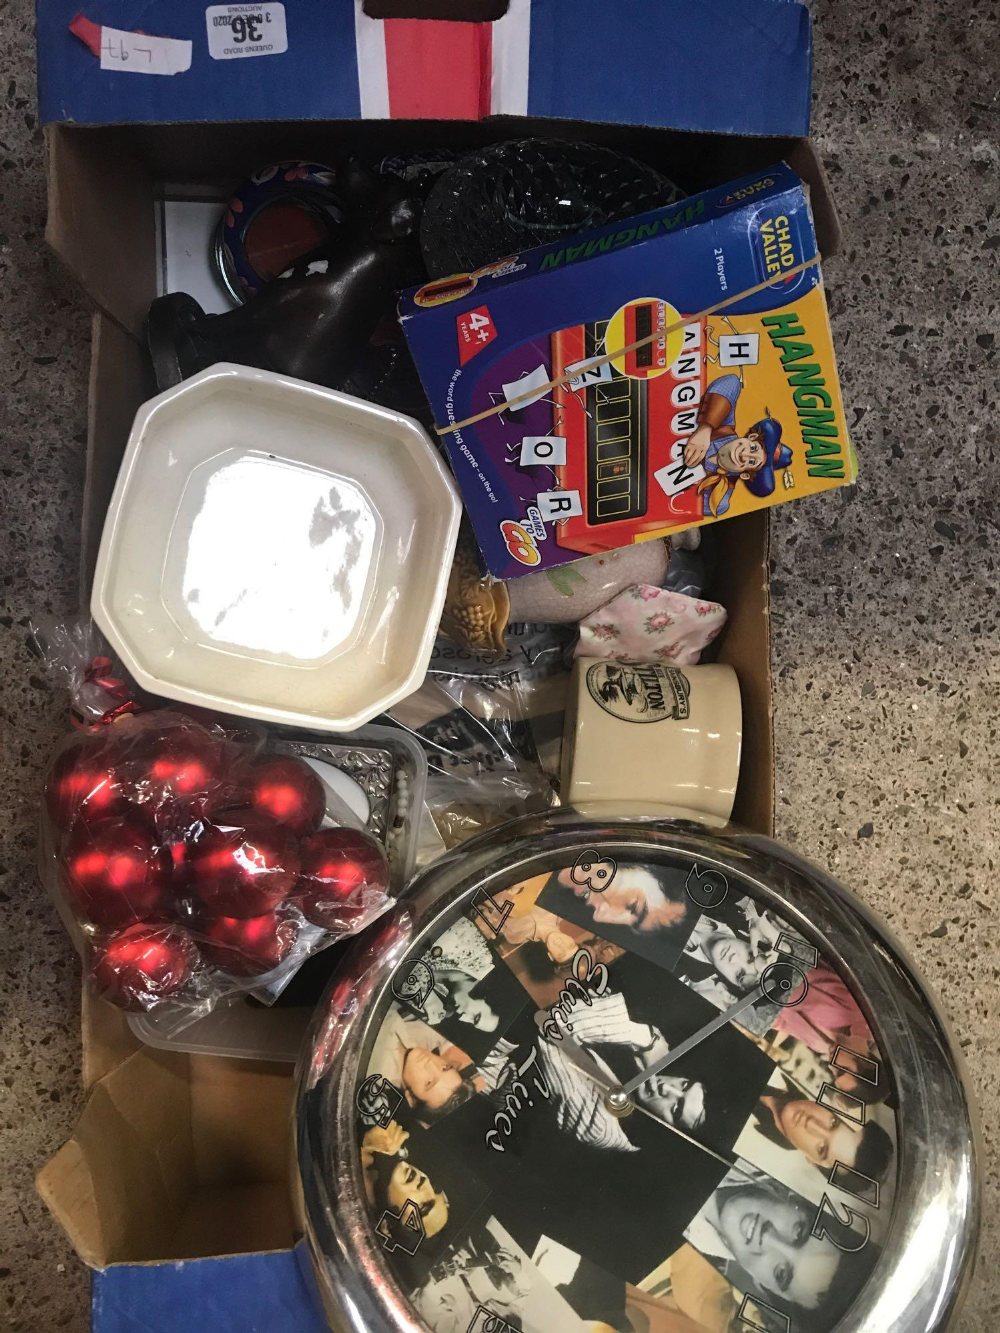 CARTON WITH RED CHRISTMAS DECORATIONS, AN ELVIS CLK, COSTUME JWL & HANG MAN GAME